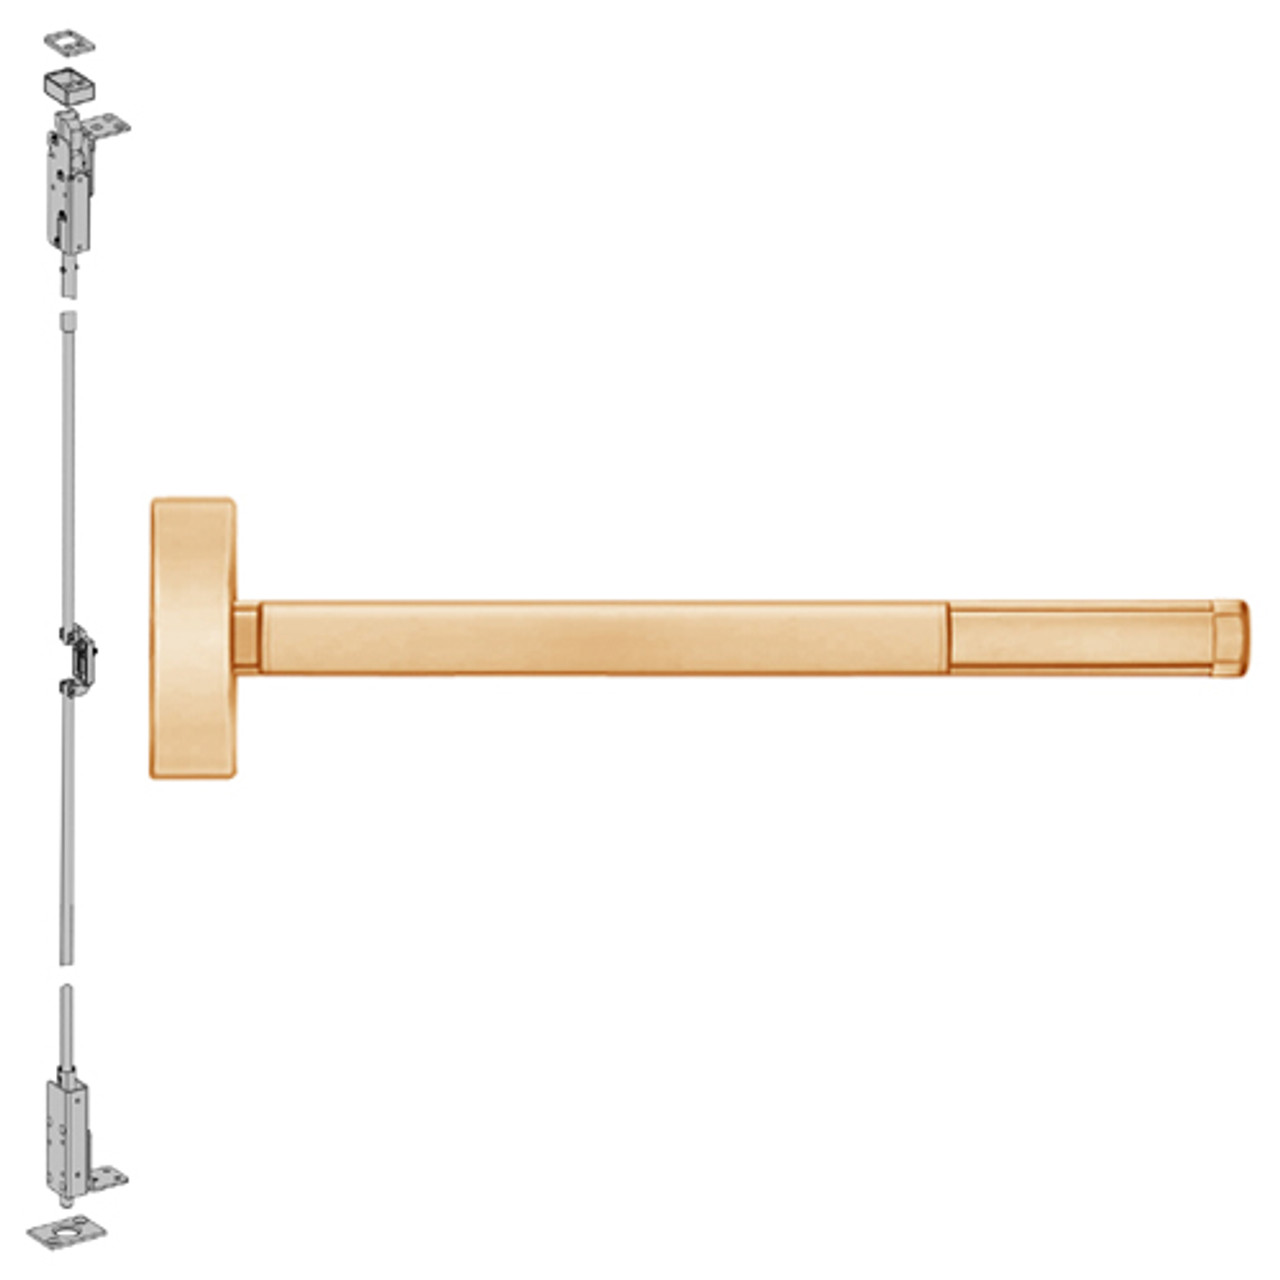 2703LBR-612-36 PHI 2700 Series Wood Door Concealed Vertical Rod Device Prepped for Key Retracts Latchbolt with Less Bottom Rod in Satin Bronze Finish